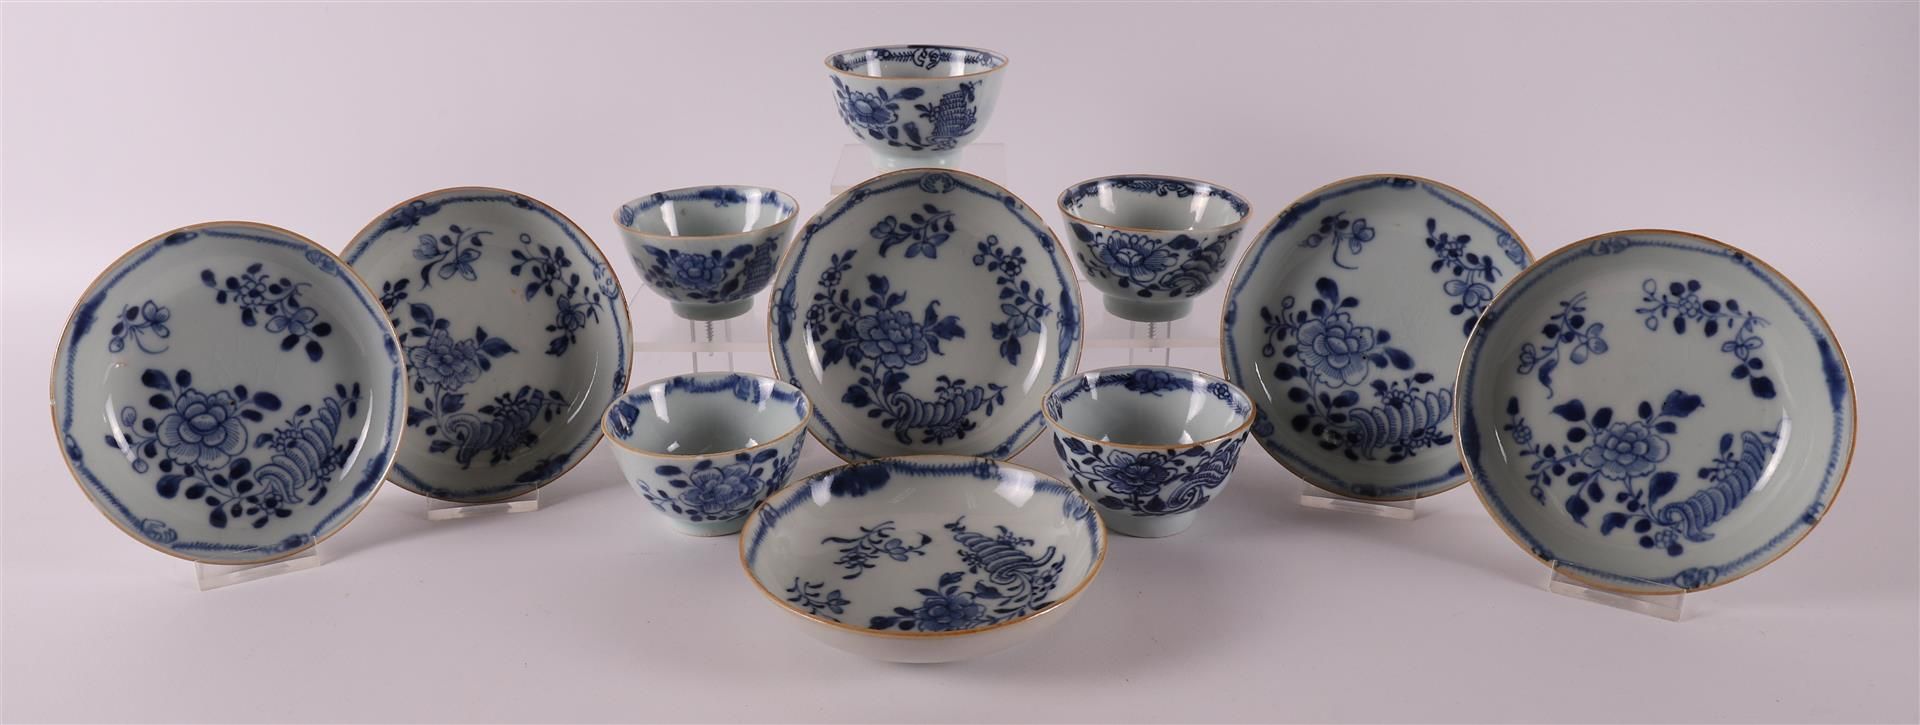 Six blue/white porcelain cups and saucers, China, Qianlong, 18th century.